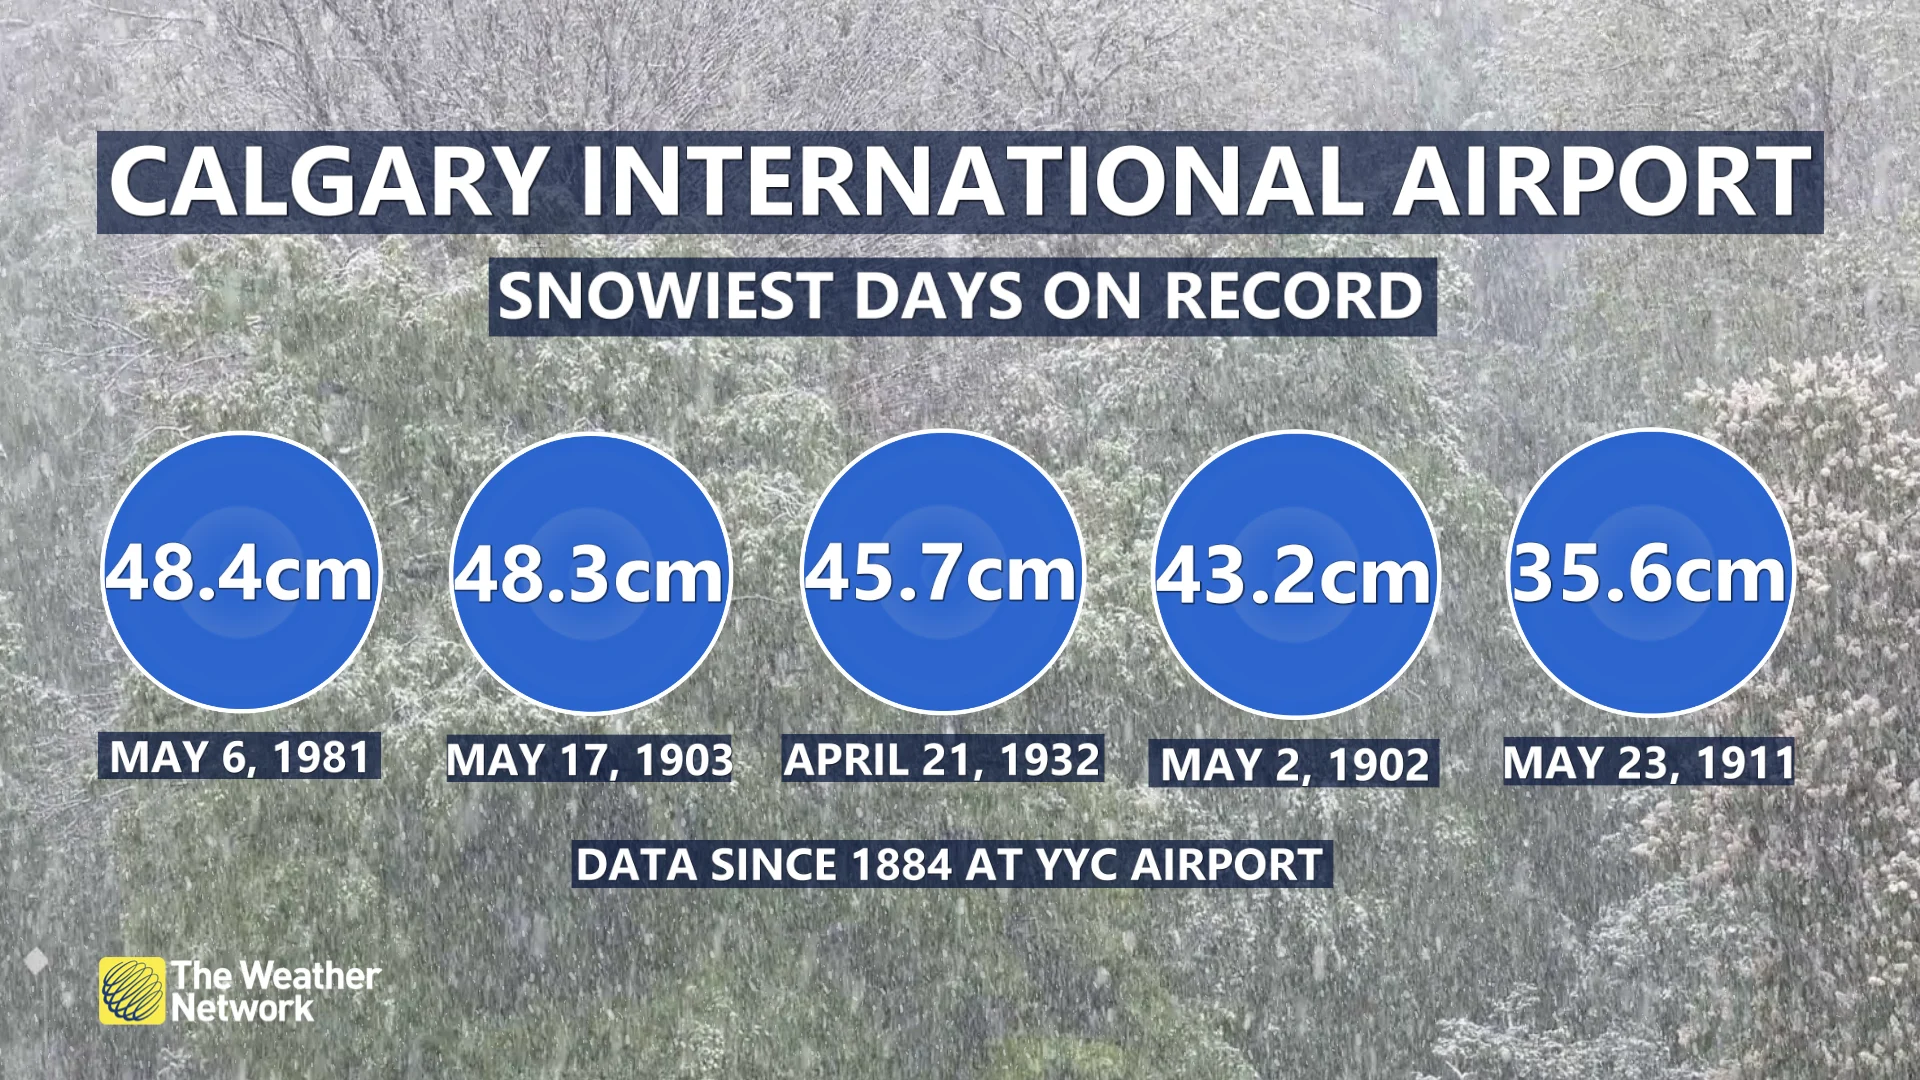 Baron_Calgary airport's snowiest days on record_April 29